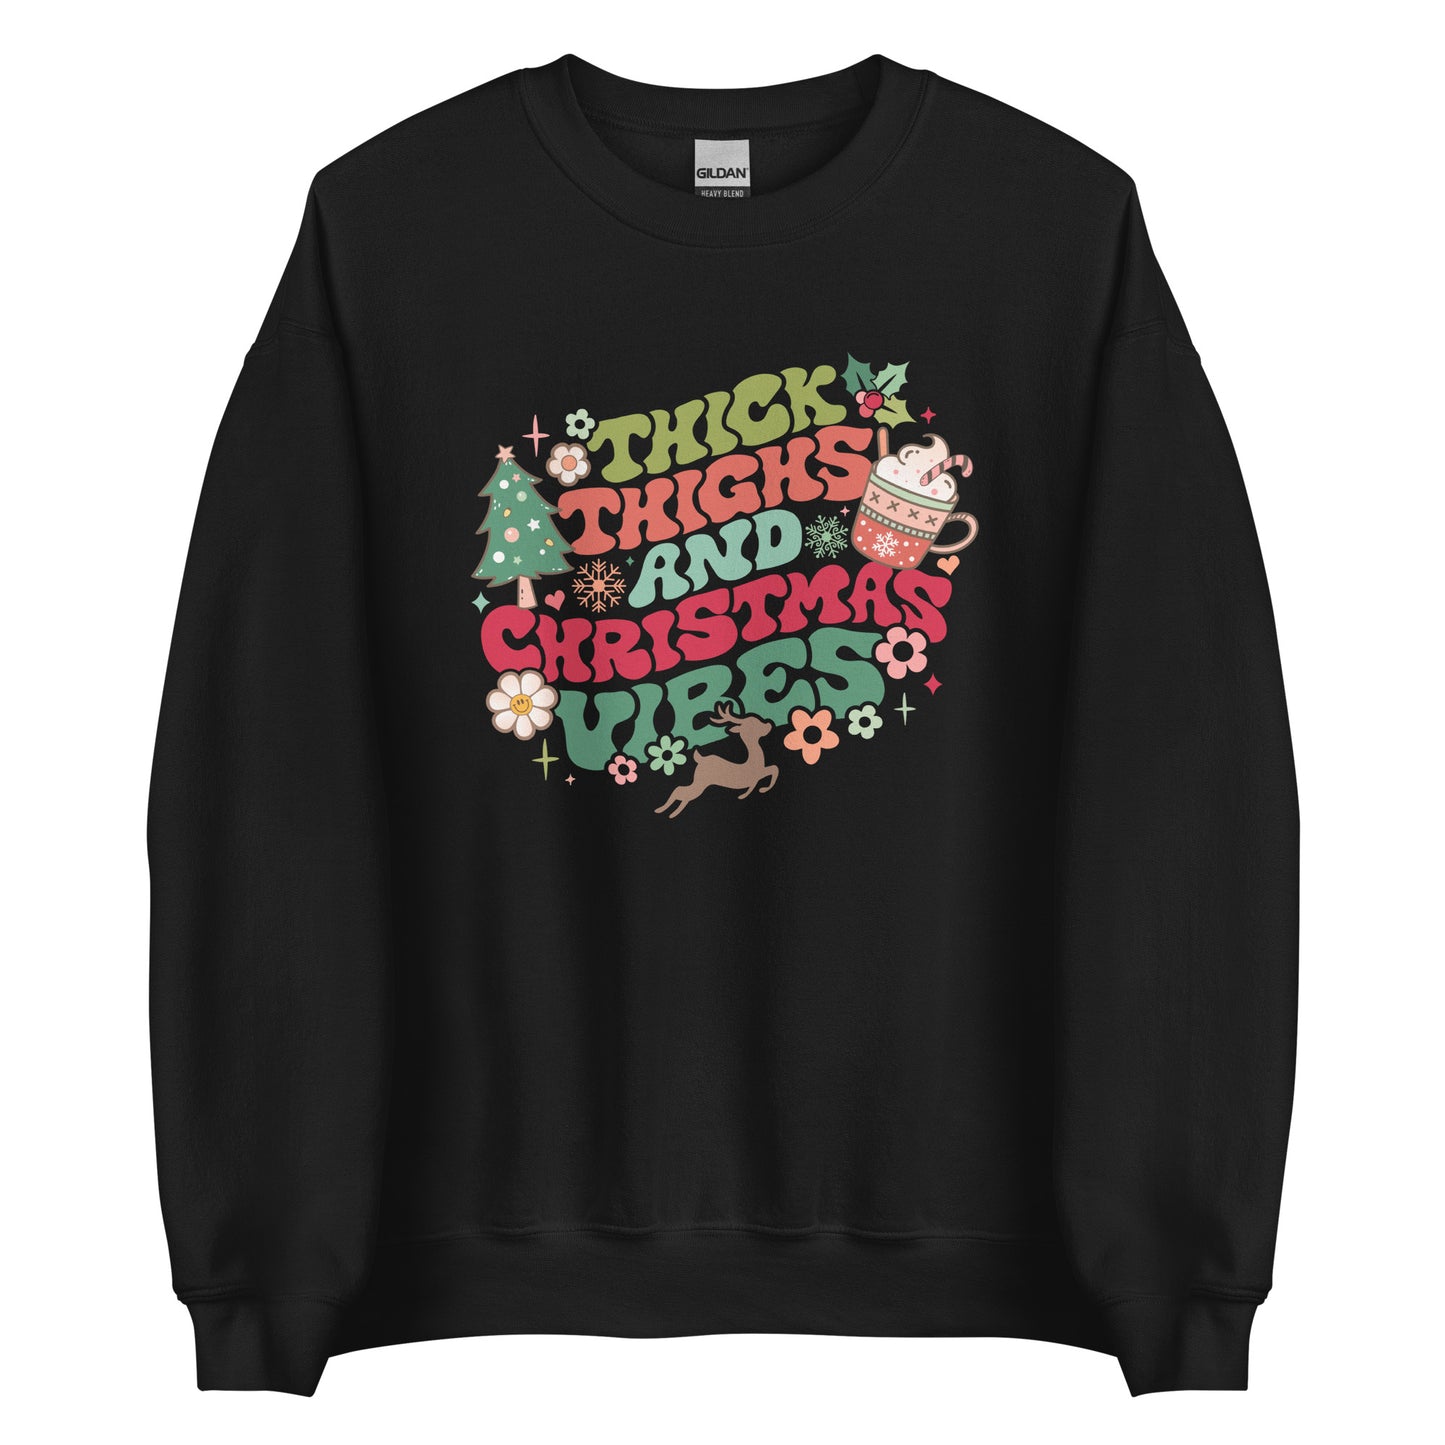 Thick Thighs And Christmas Vibes Unisex Sweatshirt